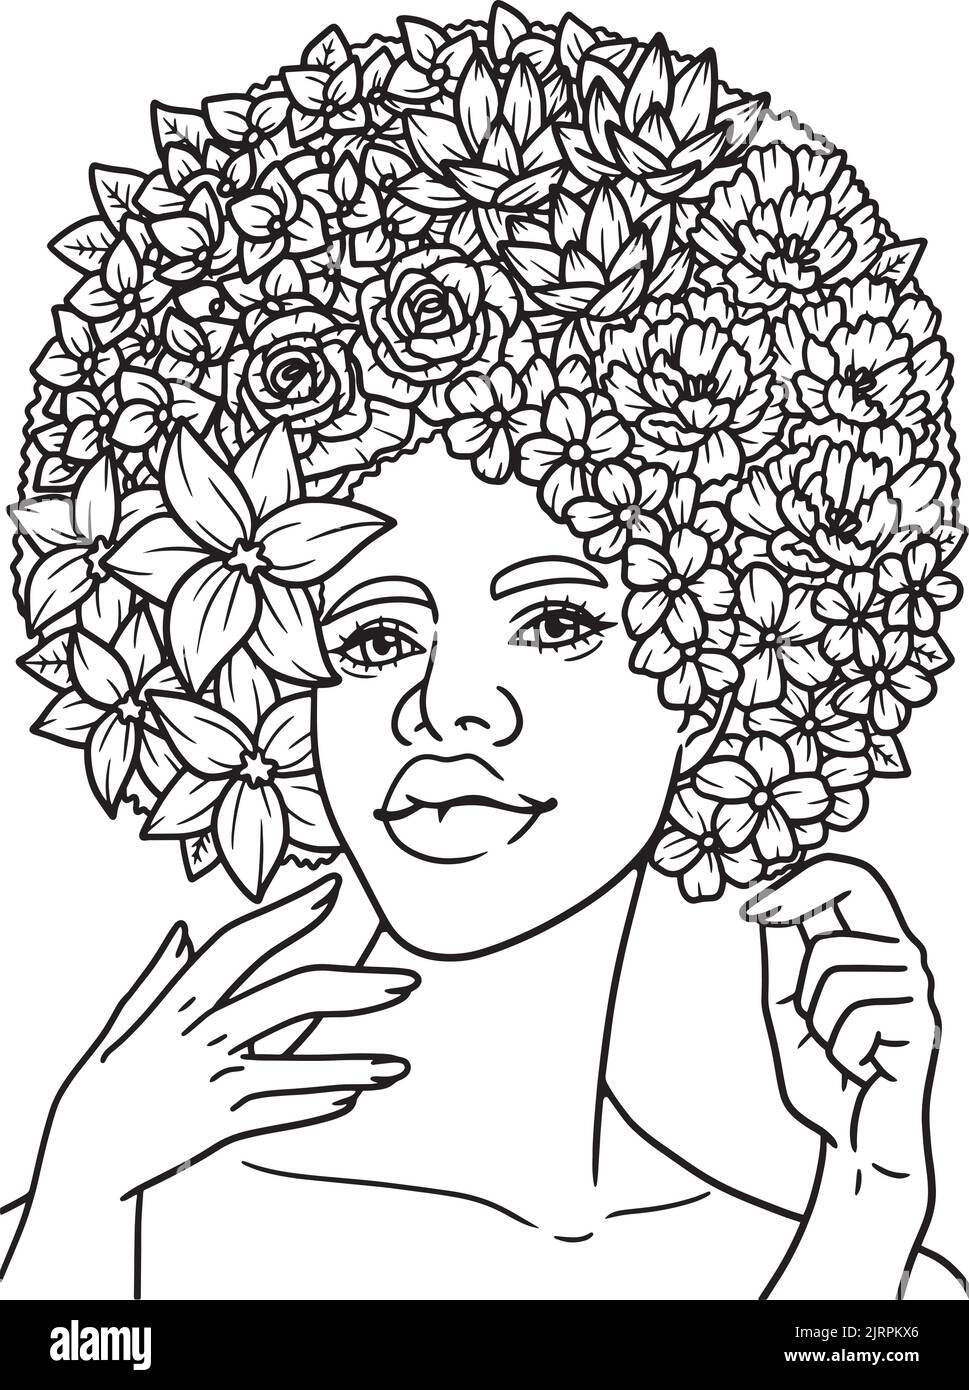 Afro American Flower Girl Coloring Page  Stock Vector